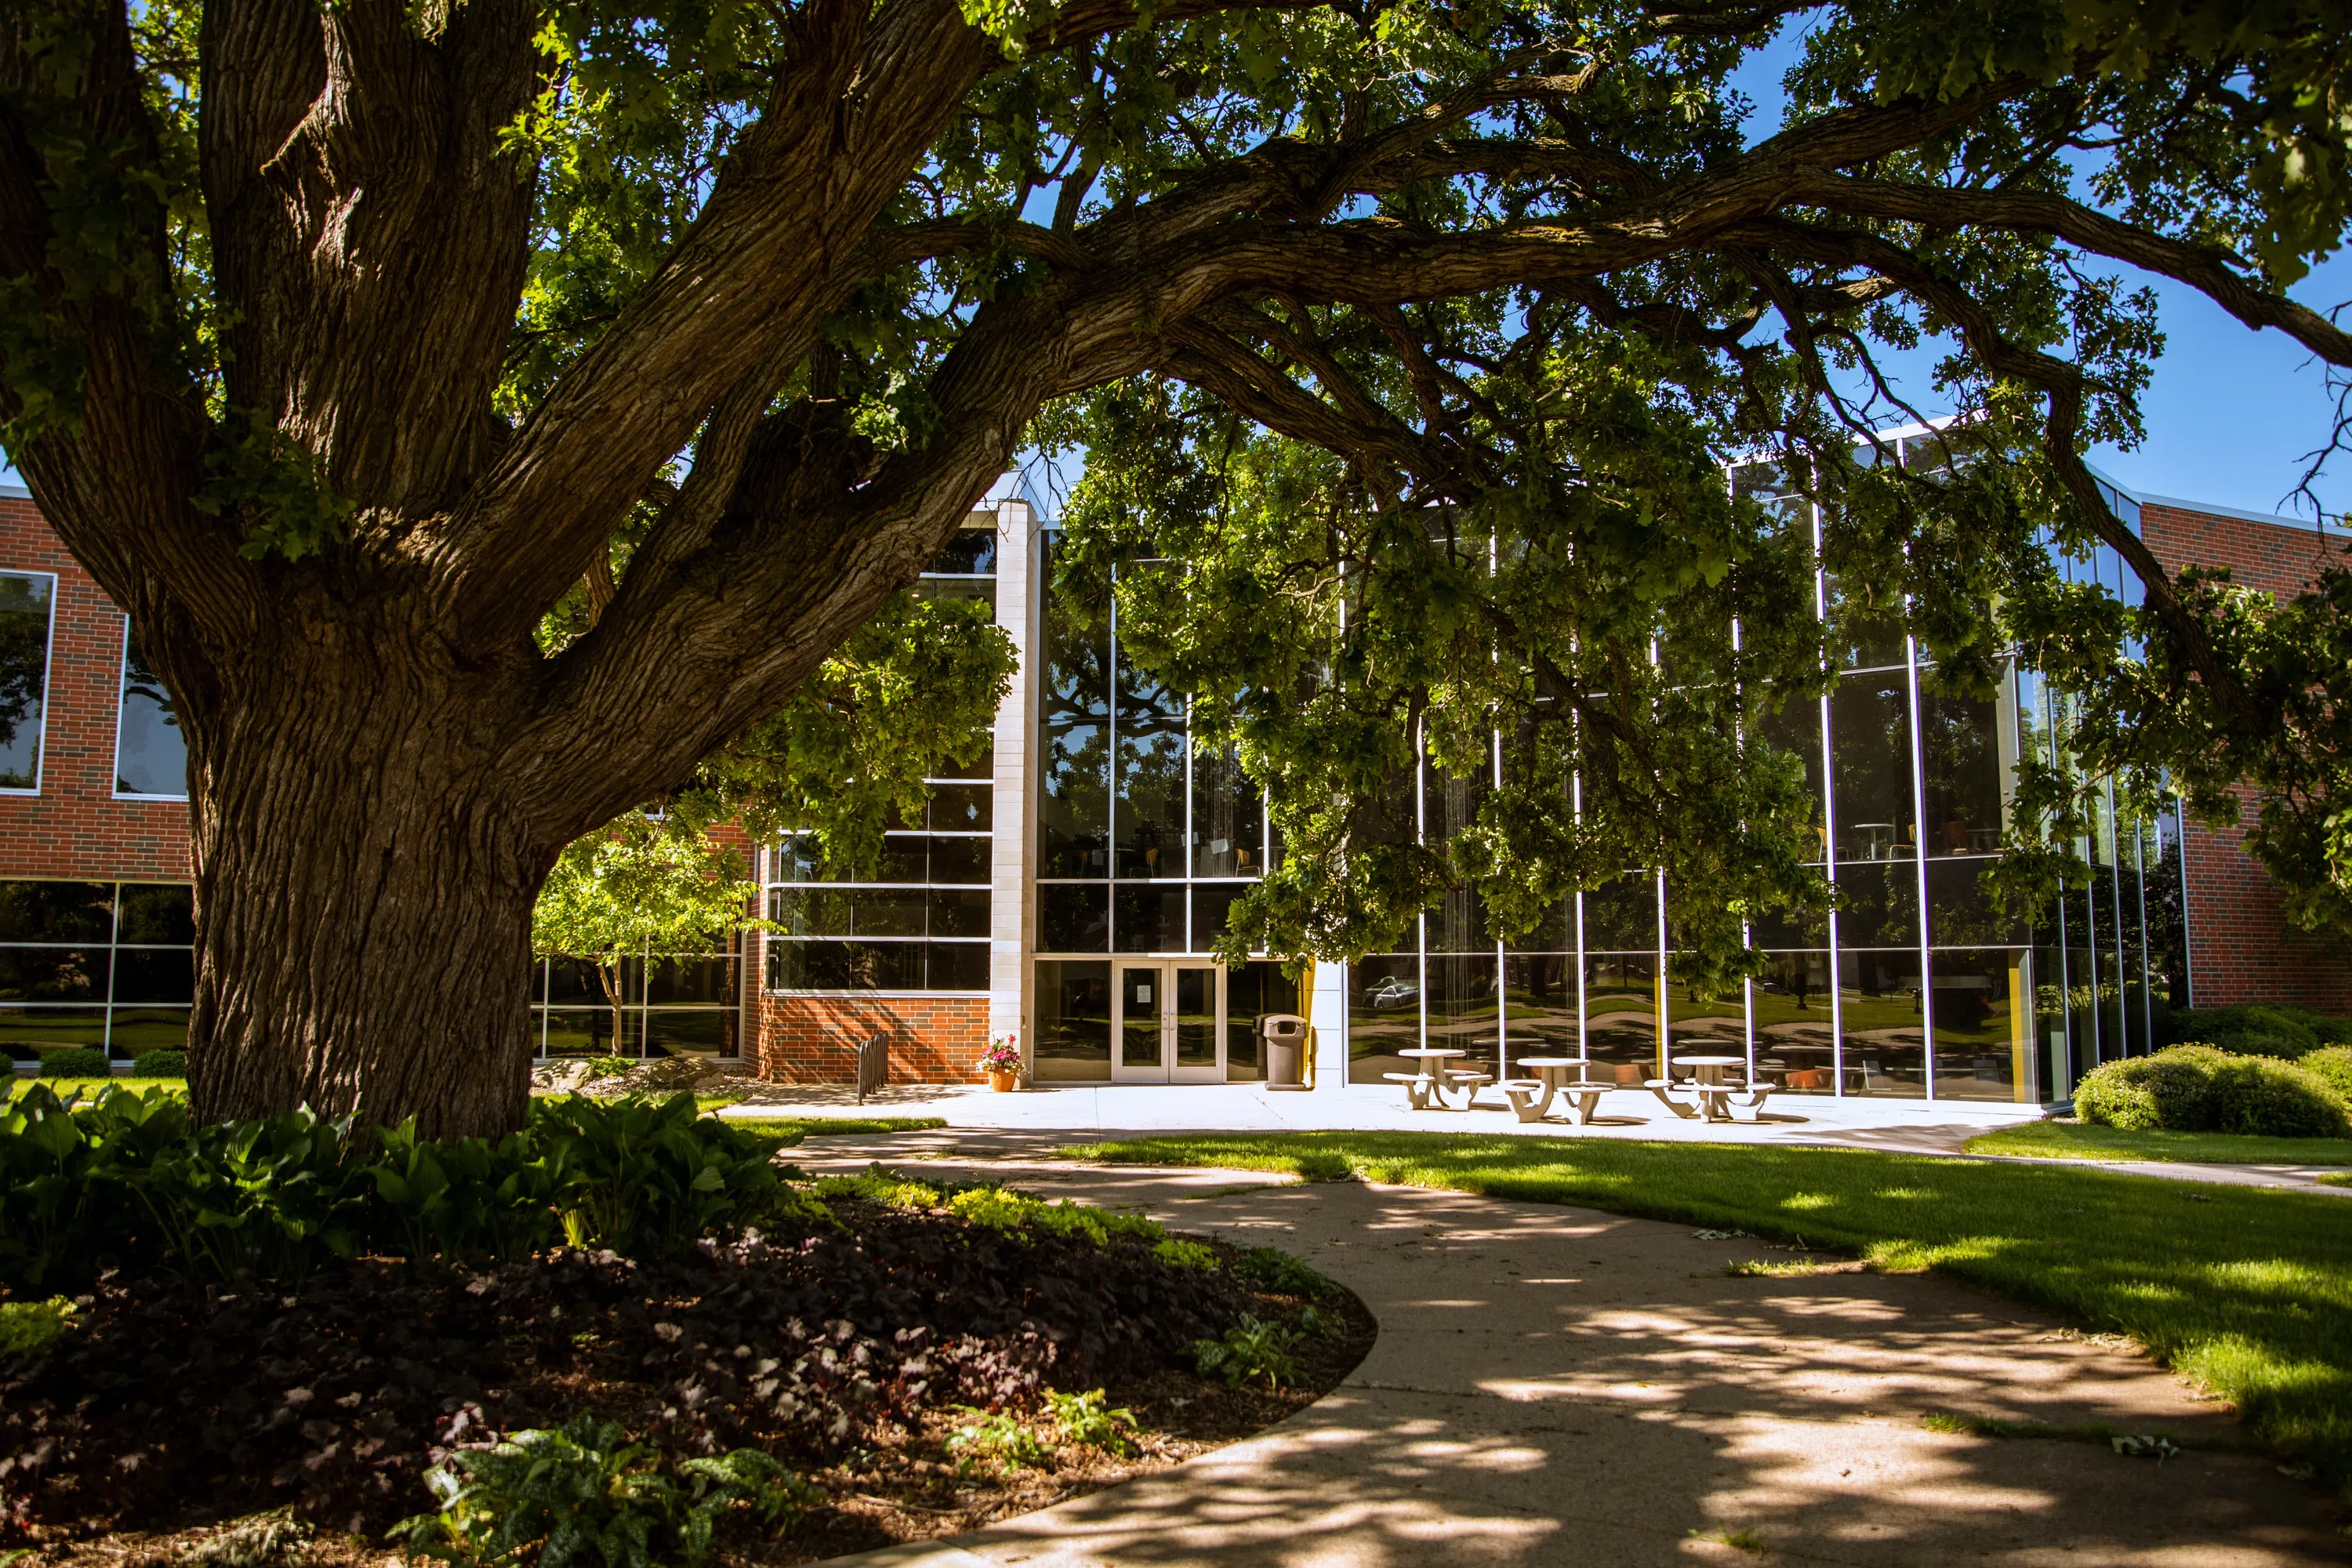 Exterior of student center with tree